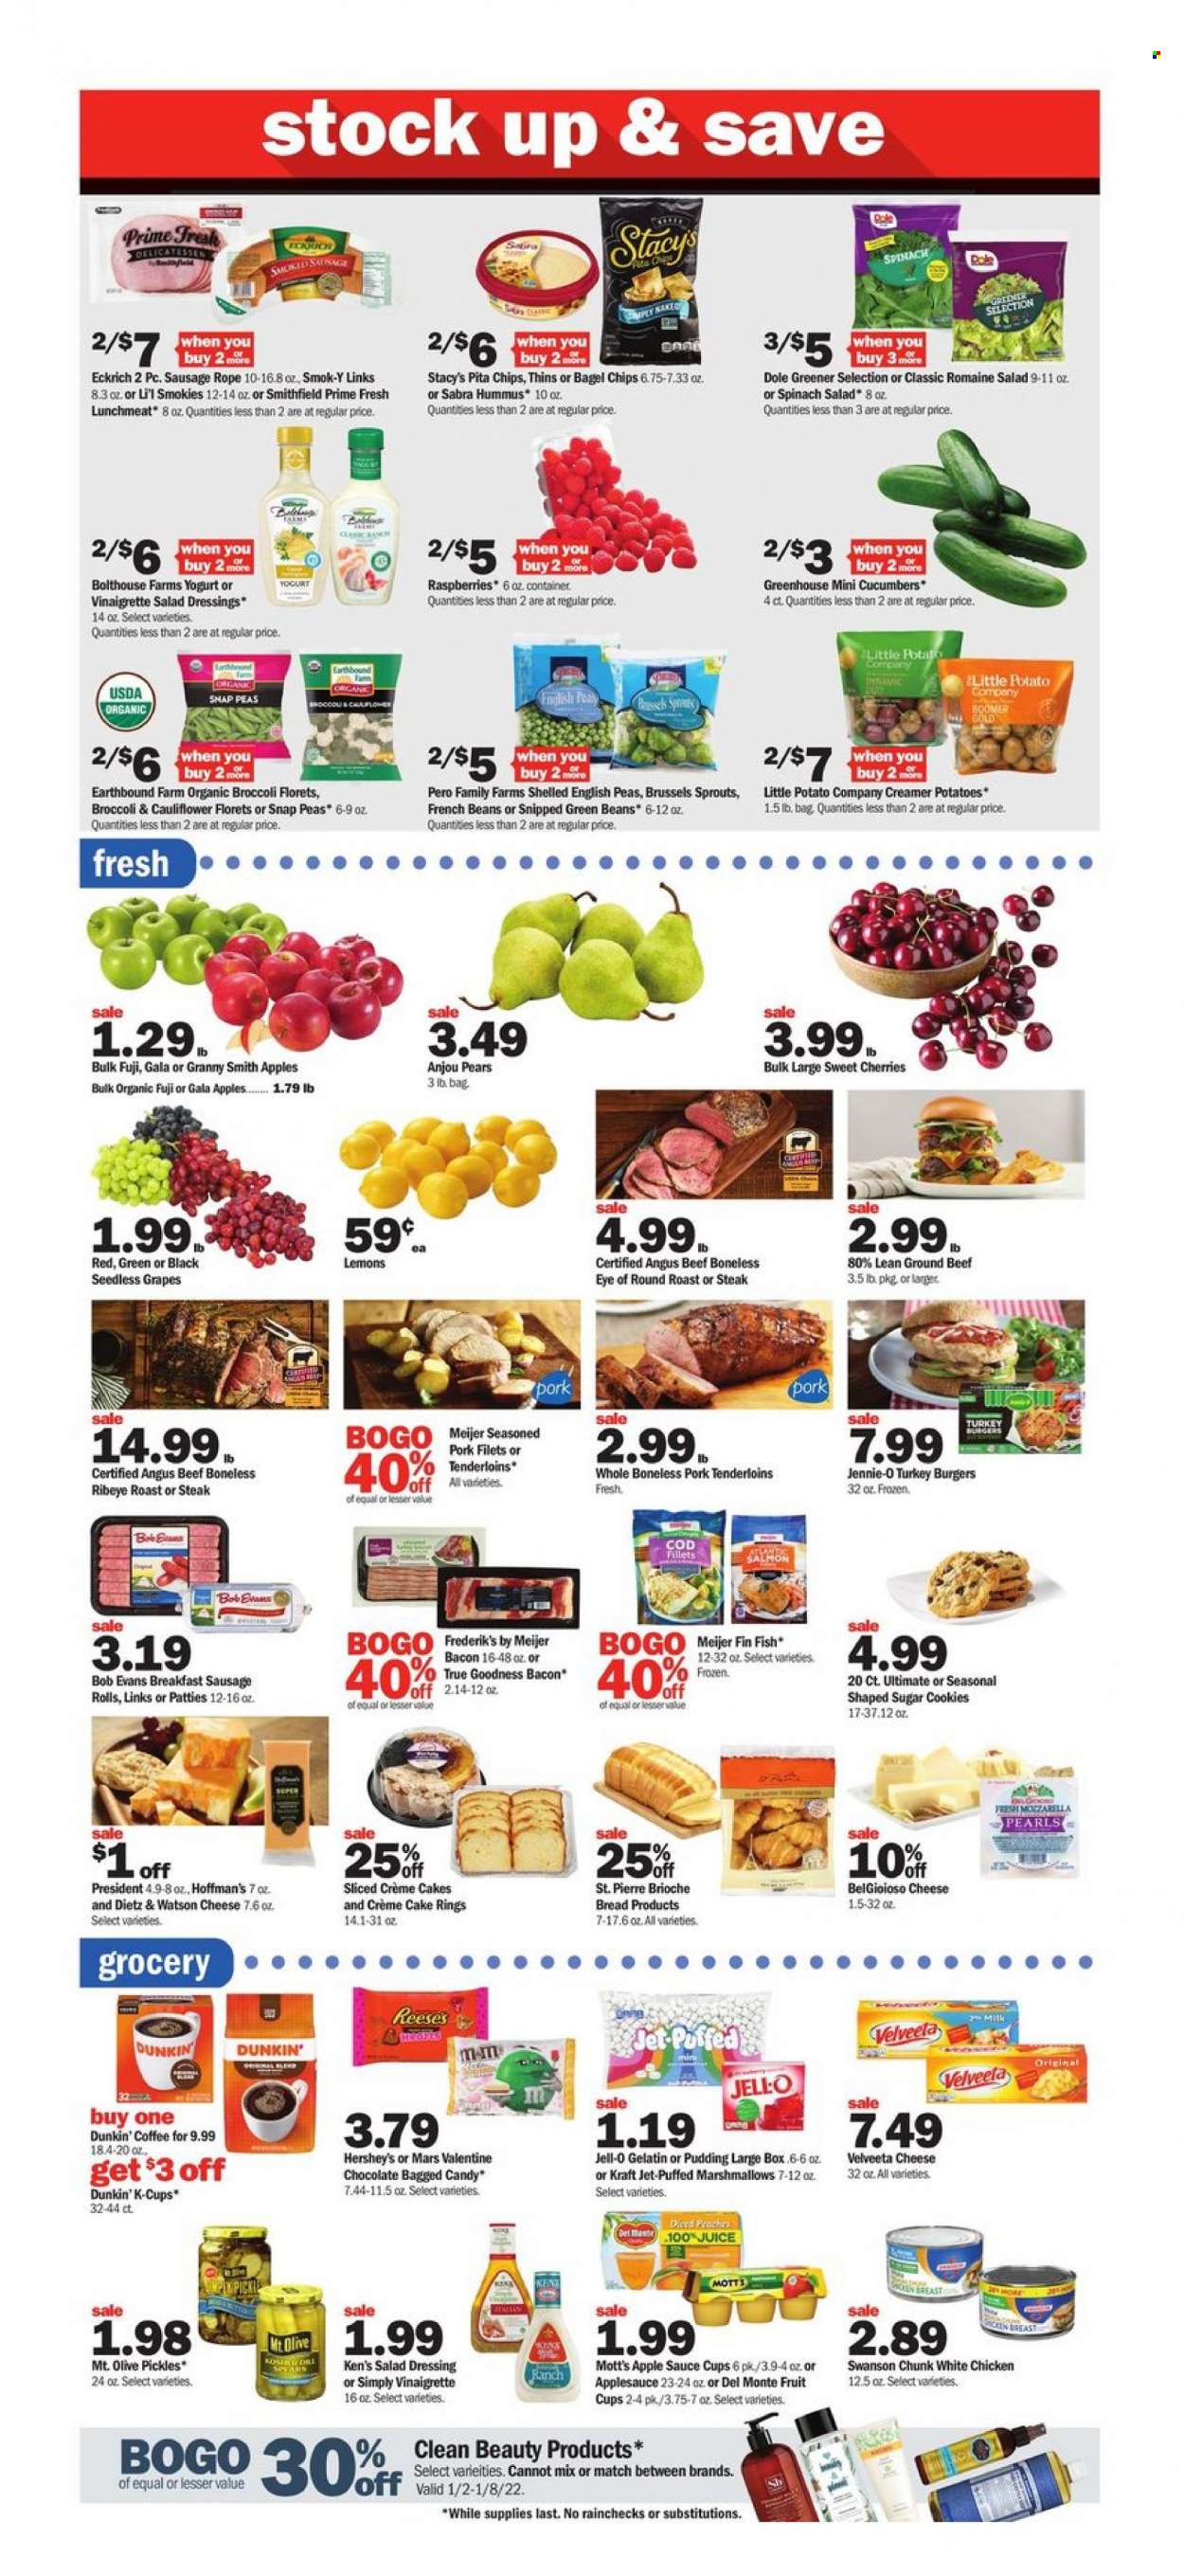 thumbnail - Meijer Flyer - 01/02/2022 - 01/08/2022 - Sales products - seedless grapes, fruit cup, bread, sausage rolls, cake, brioche, cream pie, broccoli, cucumber, french beans, green beans, potatoes, Dole, brussel sprouts, Gala, grapes, pears, Granny Smith, Mott's, cod, salmon, fish, hamburger, sauce, Kraft®, Bob Evans, bacon, Dietz & Watson, sausage, hummus, lunch meat, Président, pudding, yoghurt, milk, Reese's, Hershey's, snap peas, cookies, marshmallows, chocolate, Mars, Thins, pita chips, Jell-O, pickles, salad dressing, vinaigrette dressing, dressing, apple sauce, juice, coffee, coffee capsules, K-Cups, beef meat, ground beef, steak, eye of round, round roast, turkey burger, pork tenderloin, Jet, container, sauce cup, gelatin, lemons. Page 2.